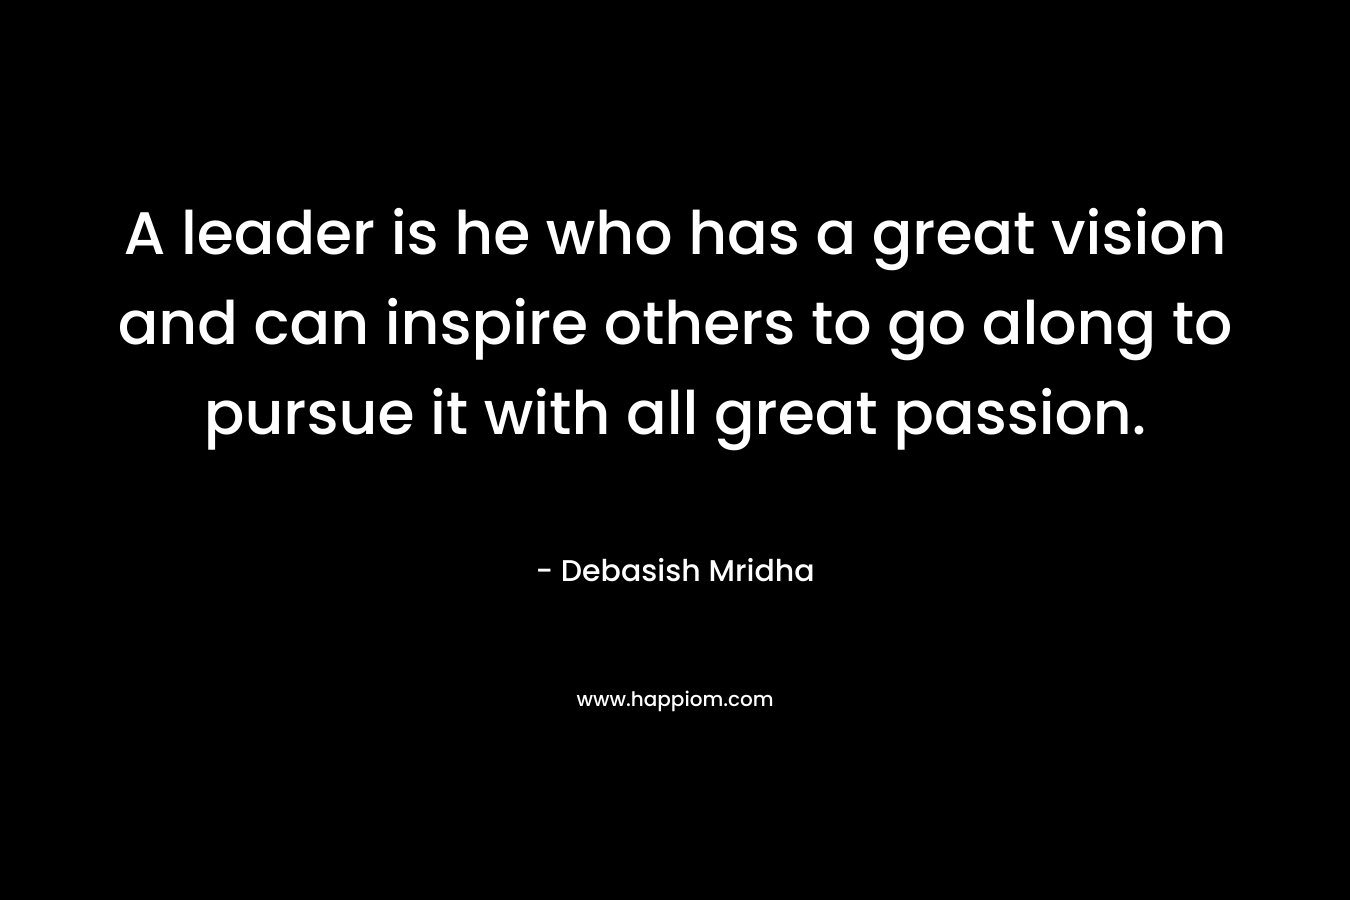 A leader is he who has a great vision and can inspire others to go along to pursue it with all great passion.